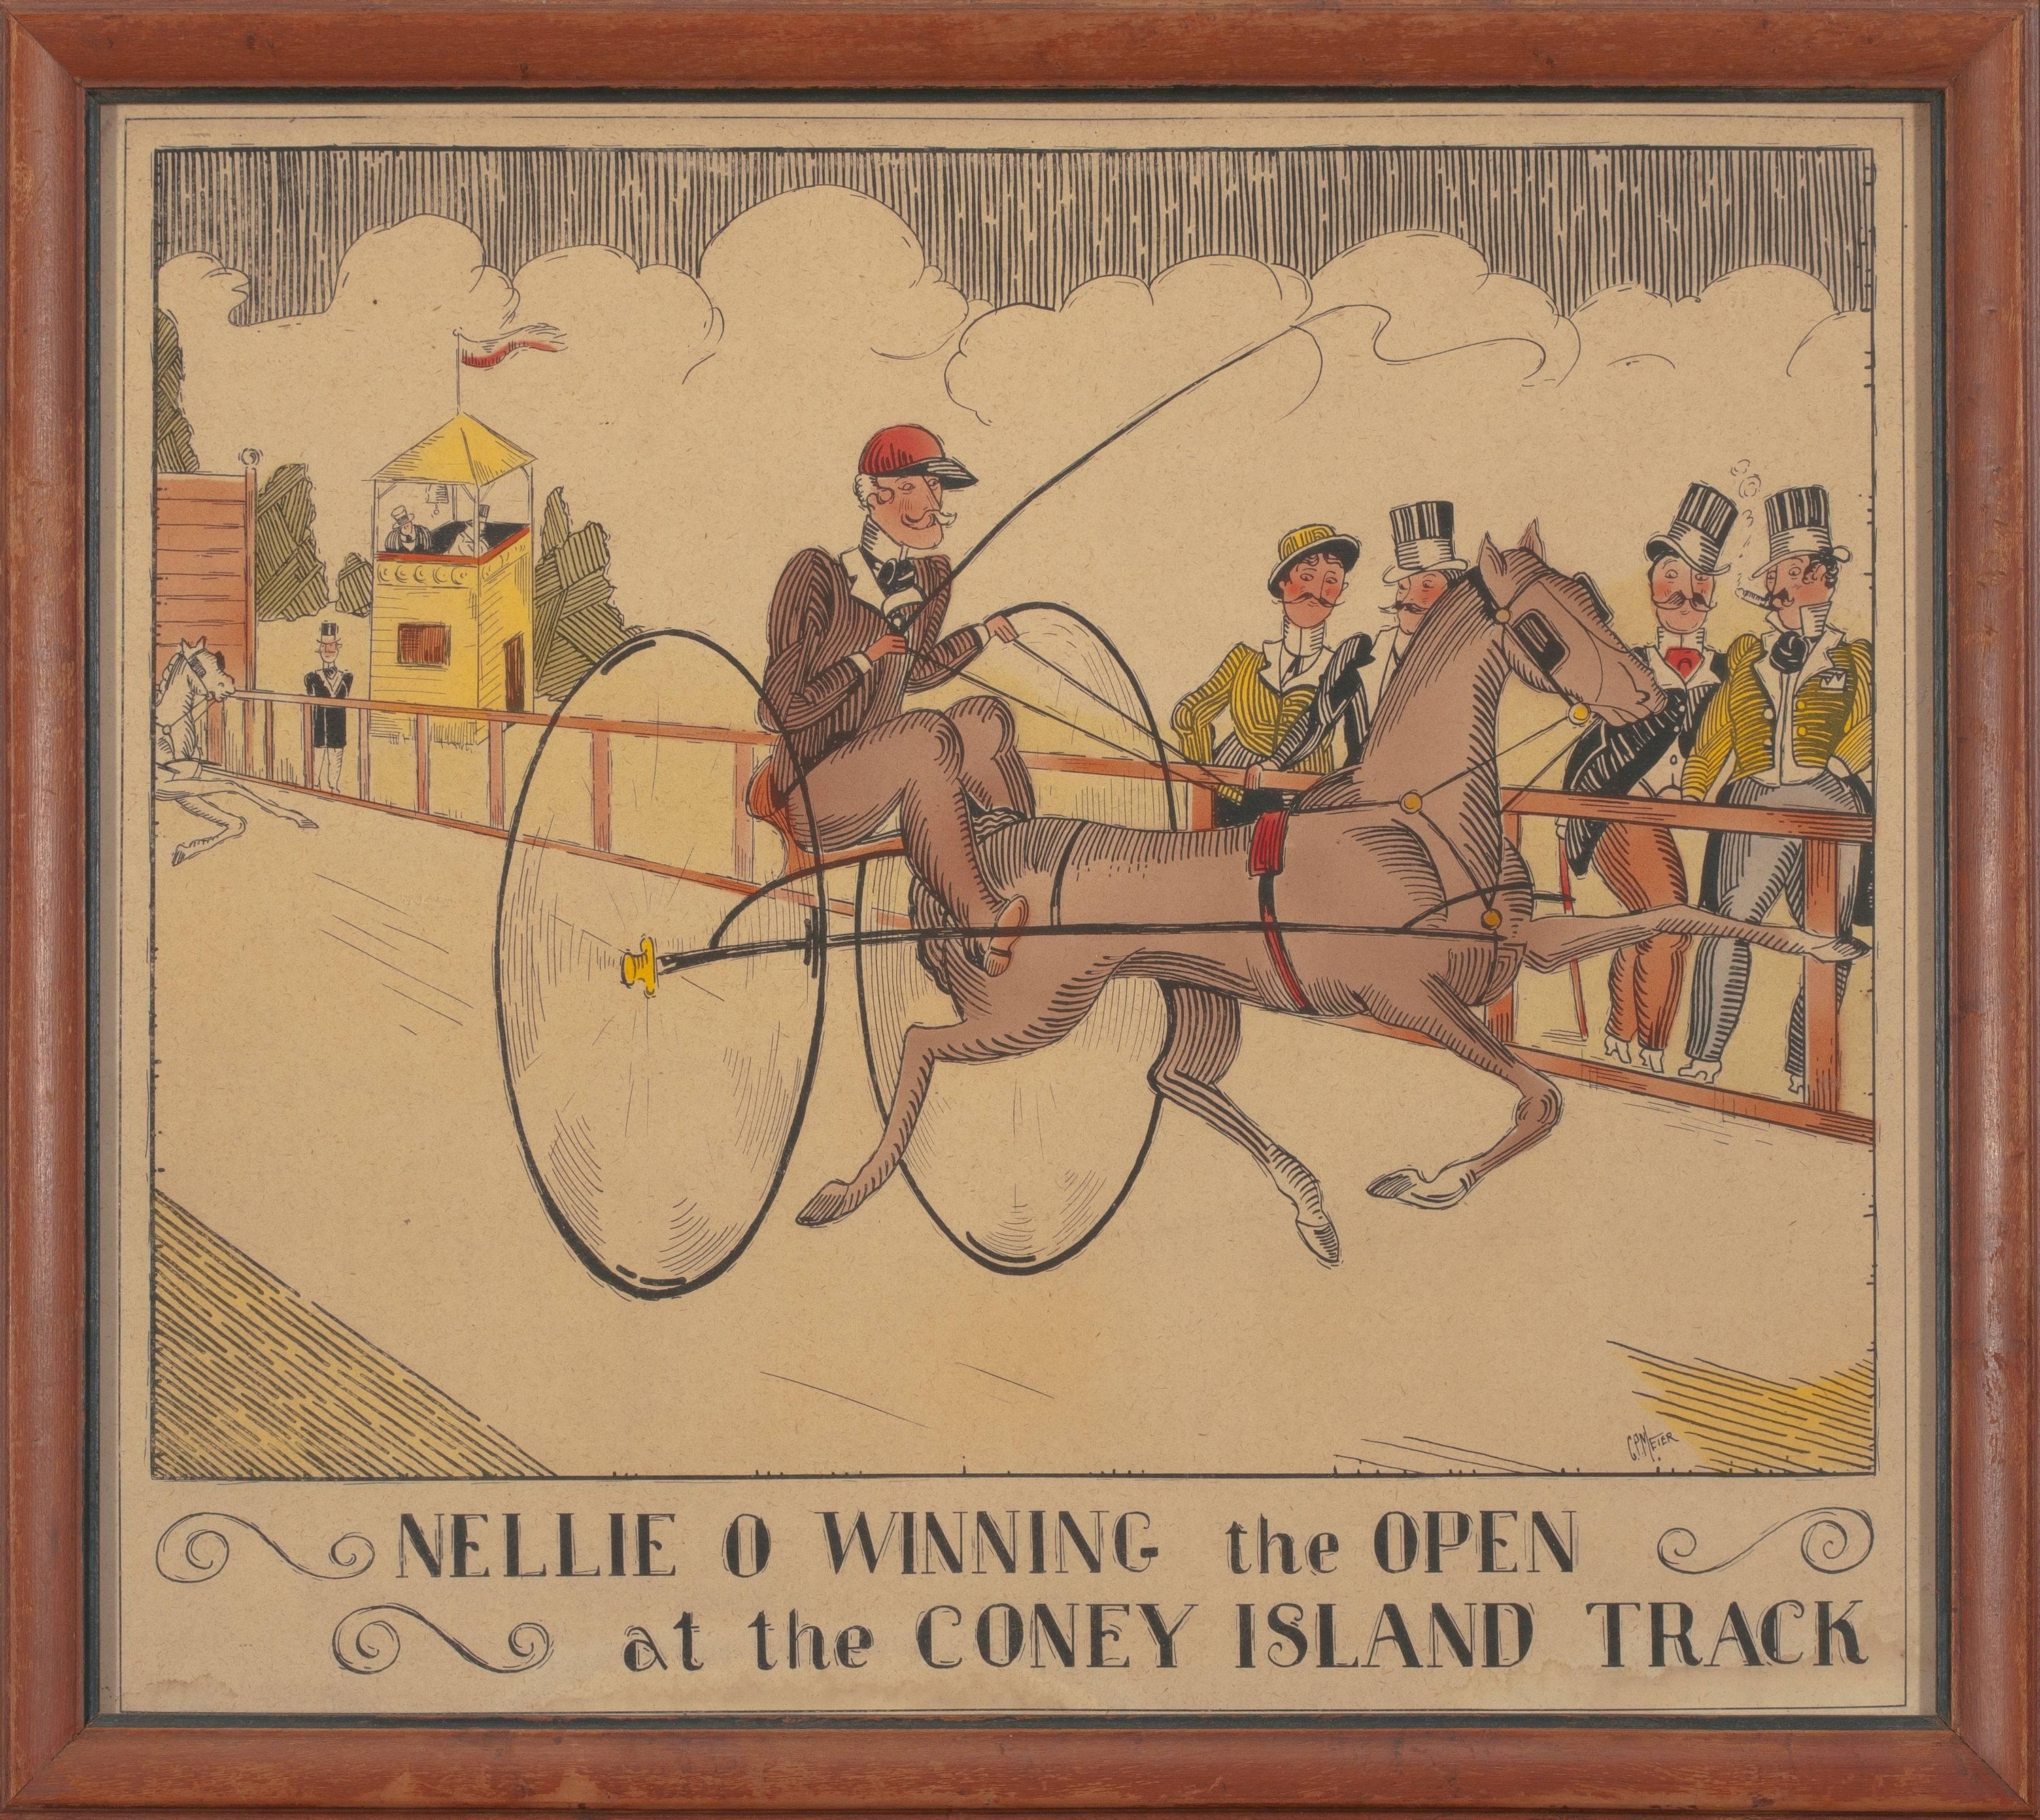 Nellie O Winning the Open at the Coney Island Track - Print by C.P. Meier